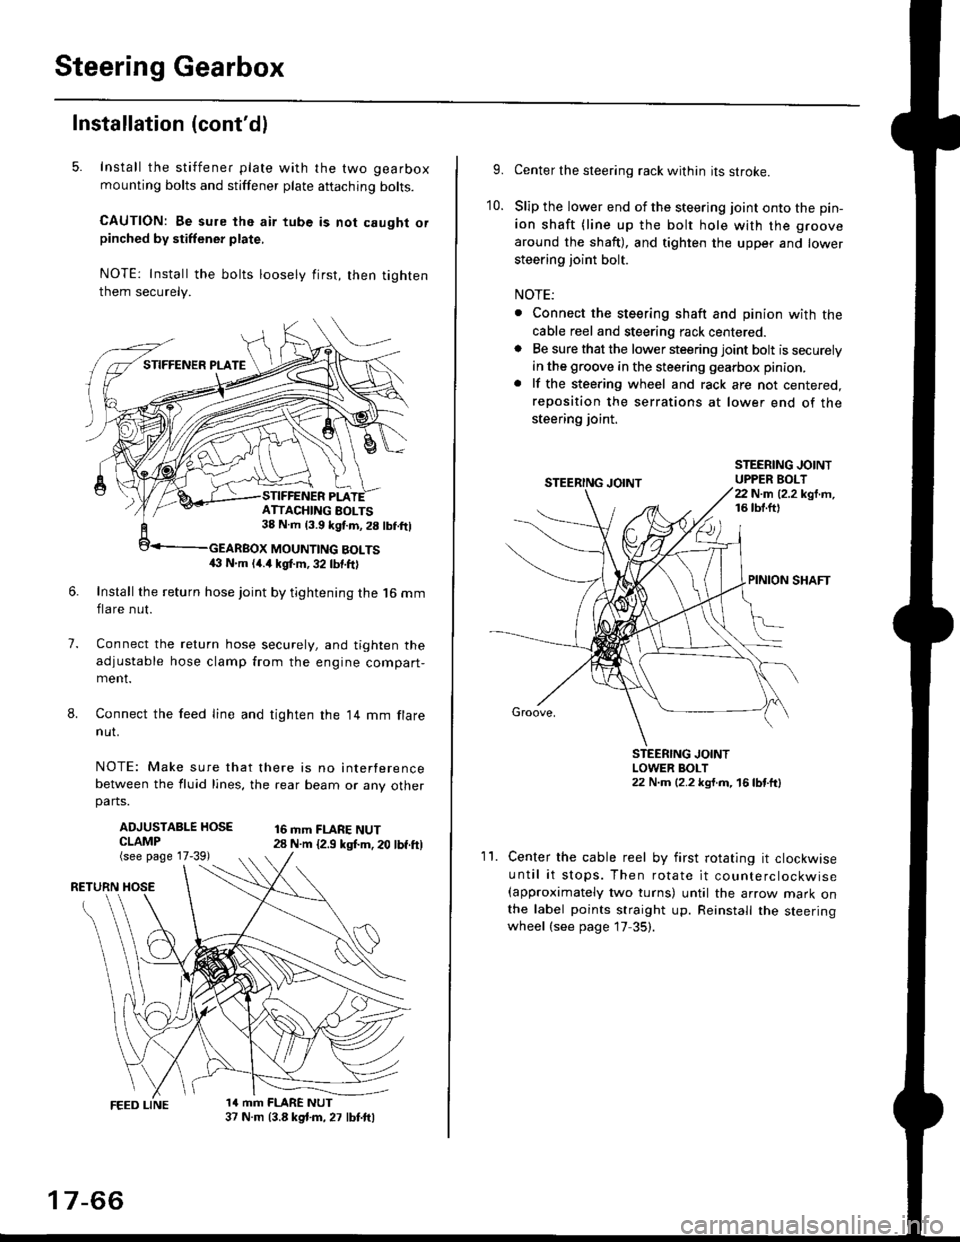 HONDA CIVIC 1996 6.G Owners Manual Steering Gearbox
Installation (contdl
5. Install the stiffener plate with the two gearbox
mounting bolts and stiffener plate aftaching bolts.
CAUTION: Be sure the air tube is not caught orpinched by 